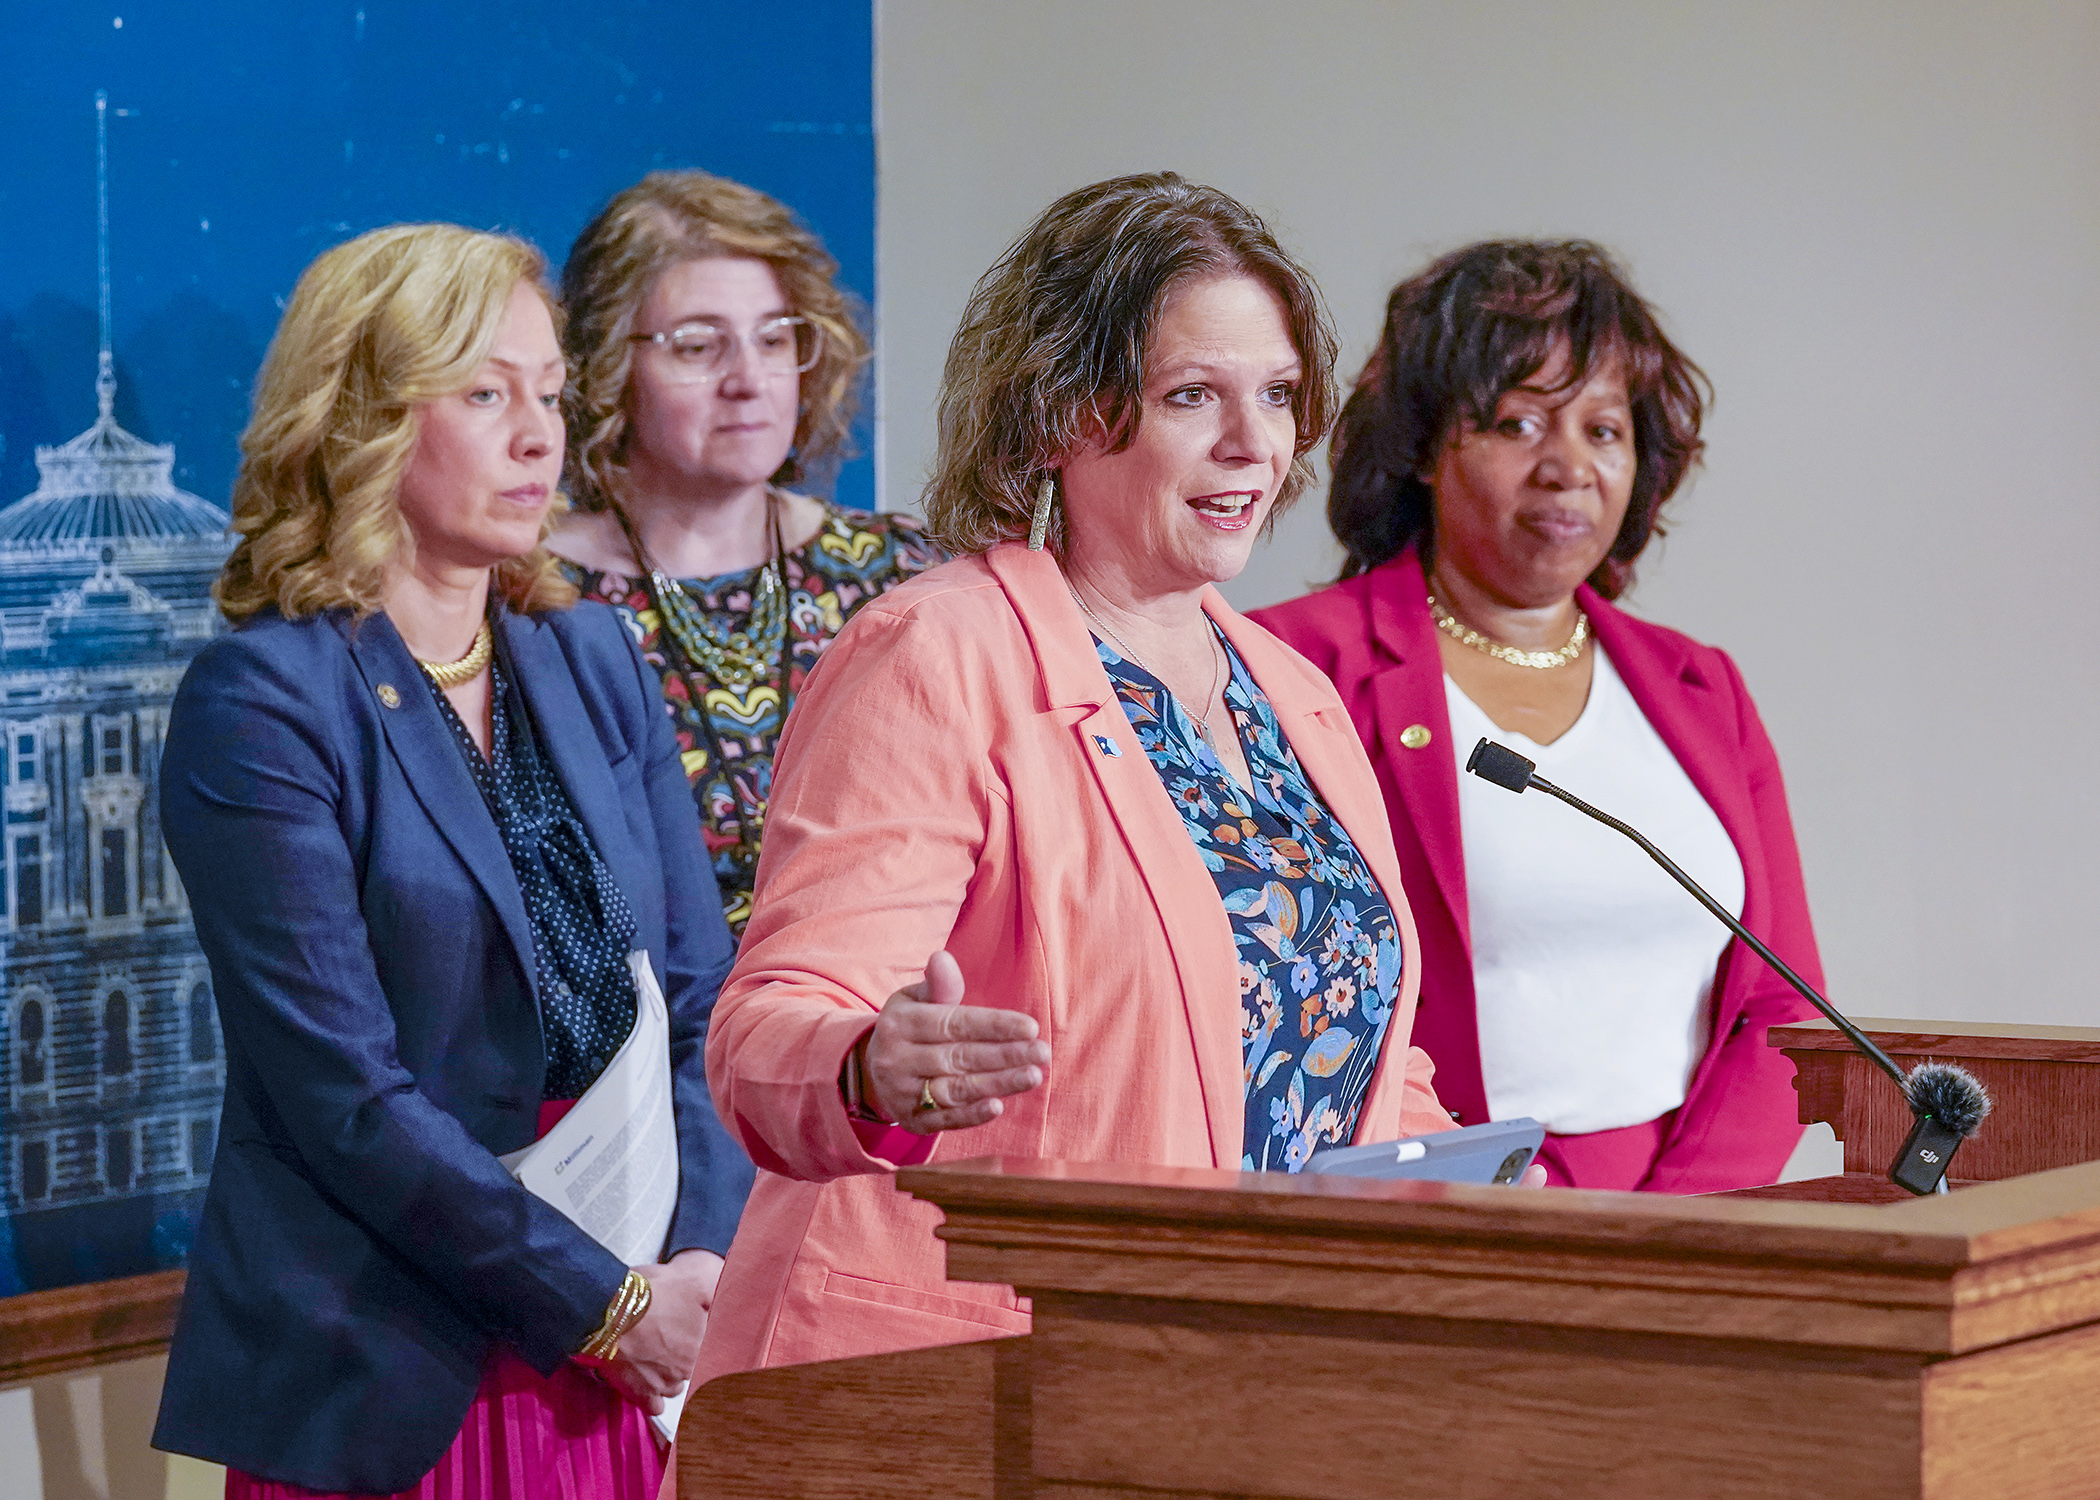 Flanked by Rep. Heather Edelson, Rep. Bianca Virnig and Rep. Mary Frances Clardy, Rep. Cheryl Youakim discusses HF5237, the K-12 education supplemental budget bill. Youakim, the House Education Finance Committee chair, sponsors the bill up or a floor vote Tuesday. (Photo by Andrew VonBank)